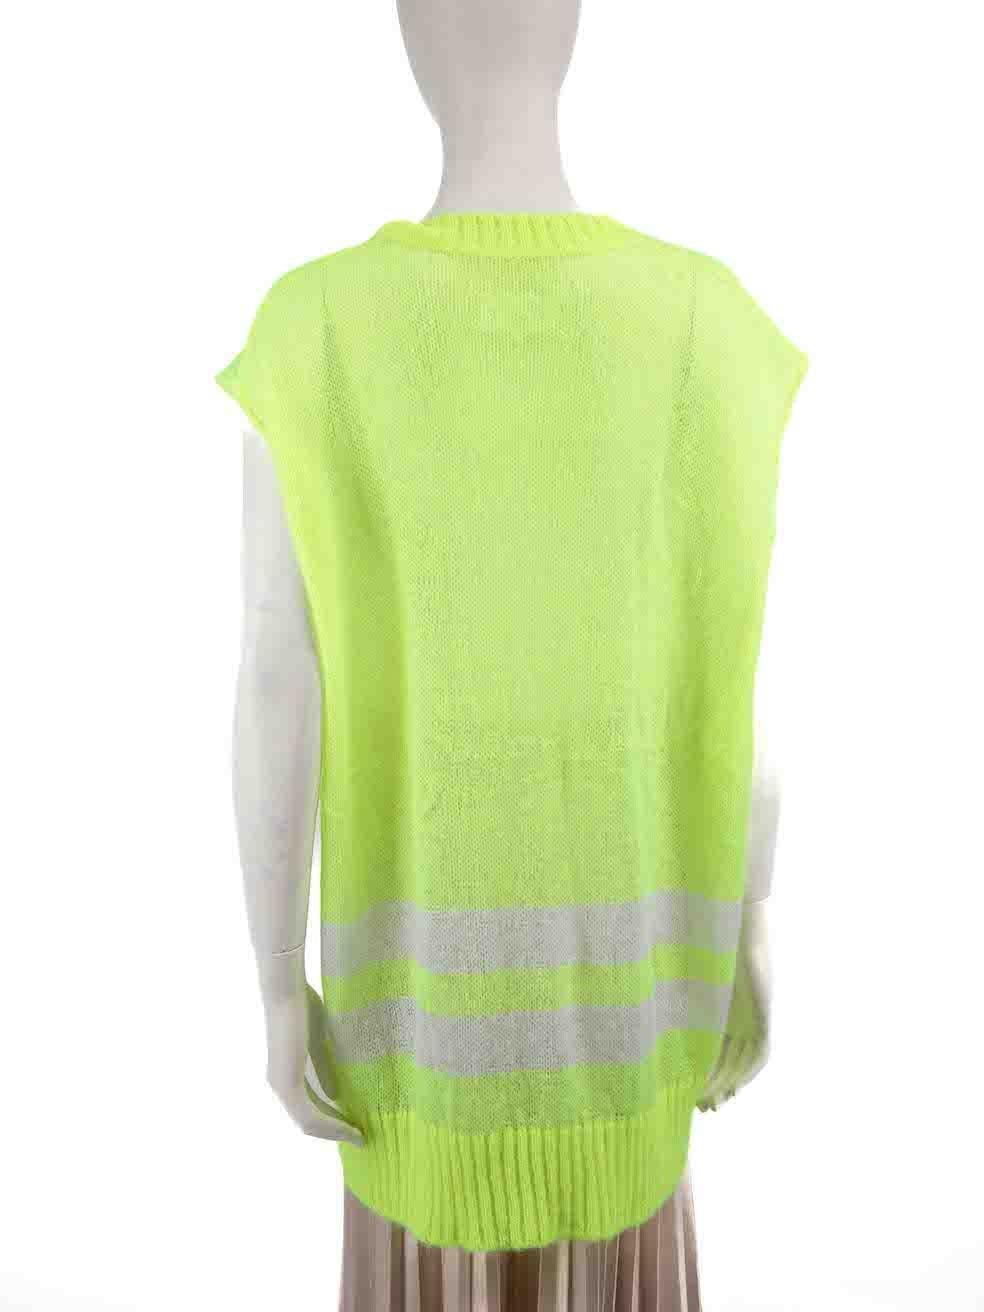 Maison Margiela Neon Yellow Striped Knit Vest Size XS In Good Condition For Sale In London, GB